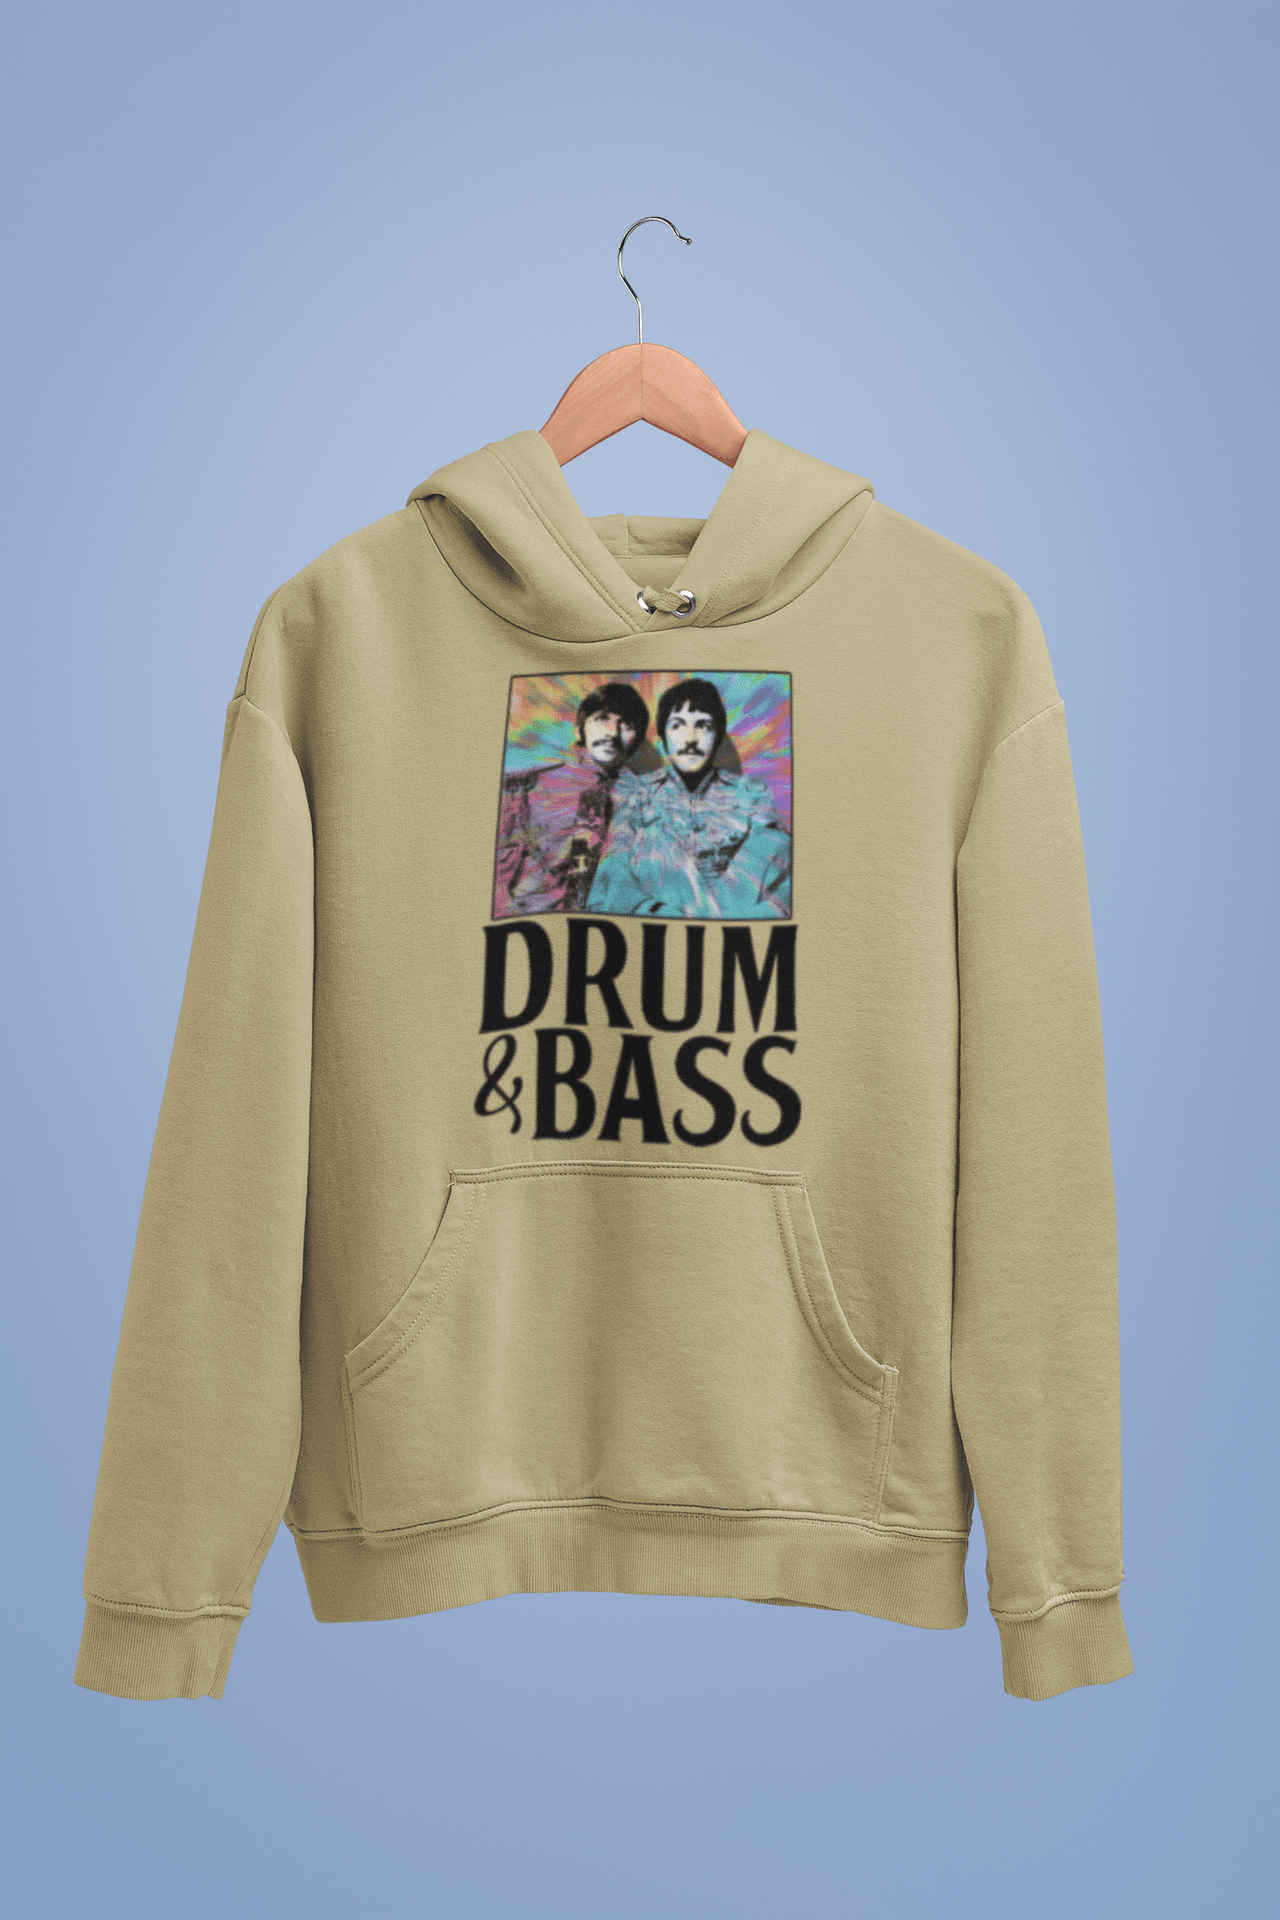 Drum and Bass, Ringo and Paul Unisex Hoodie 8Ball